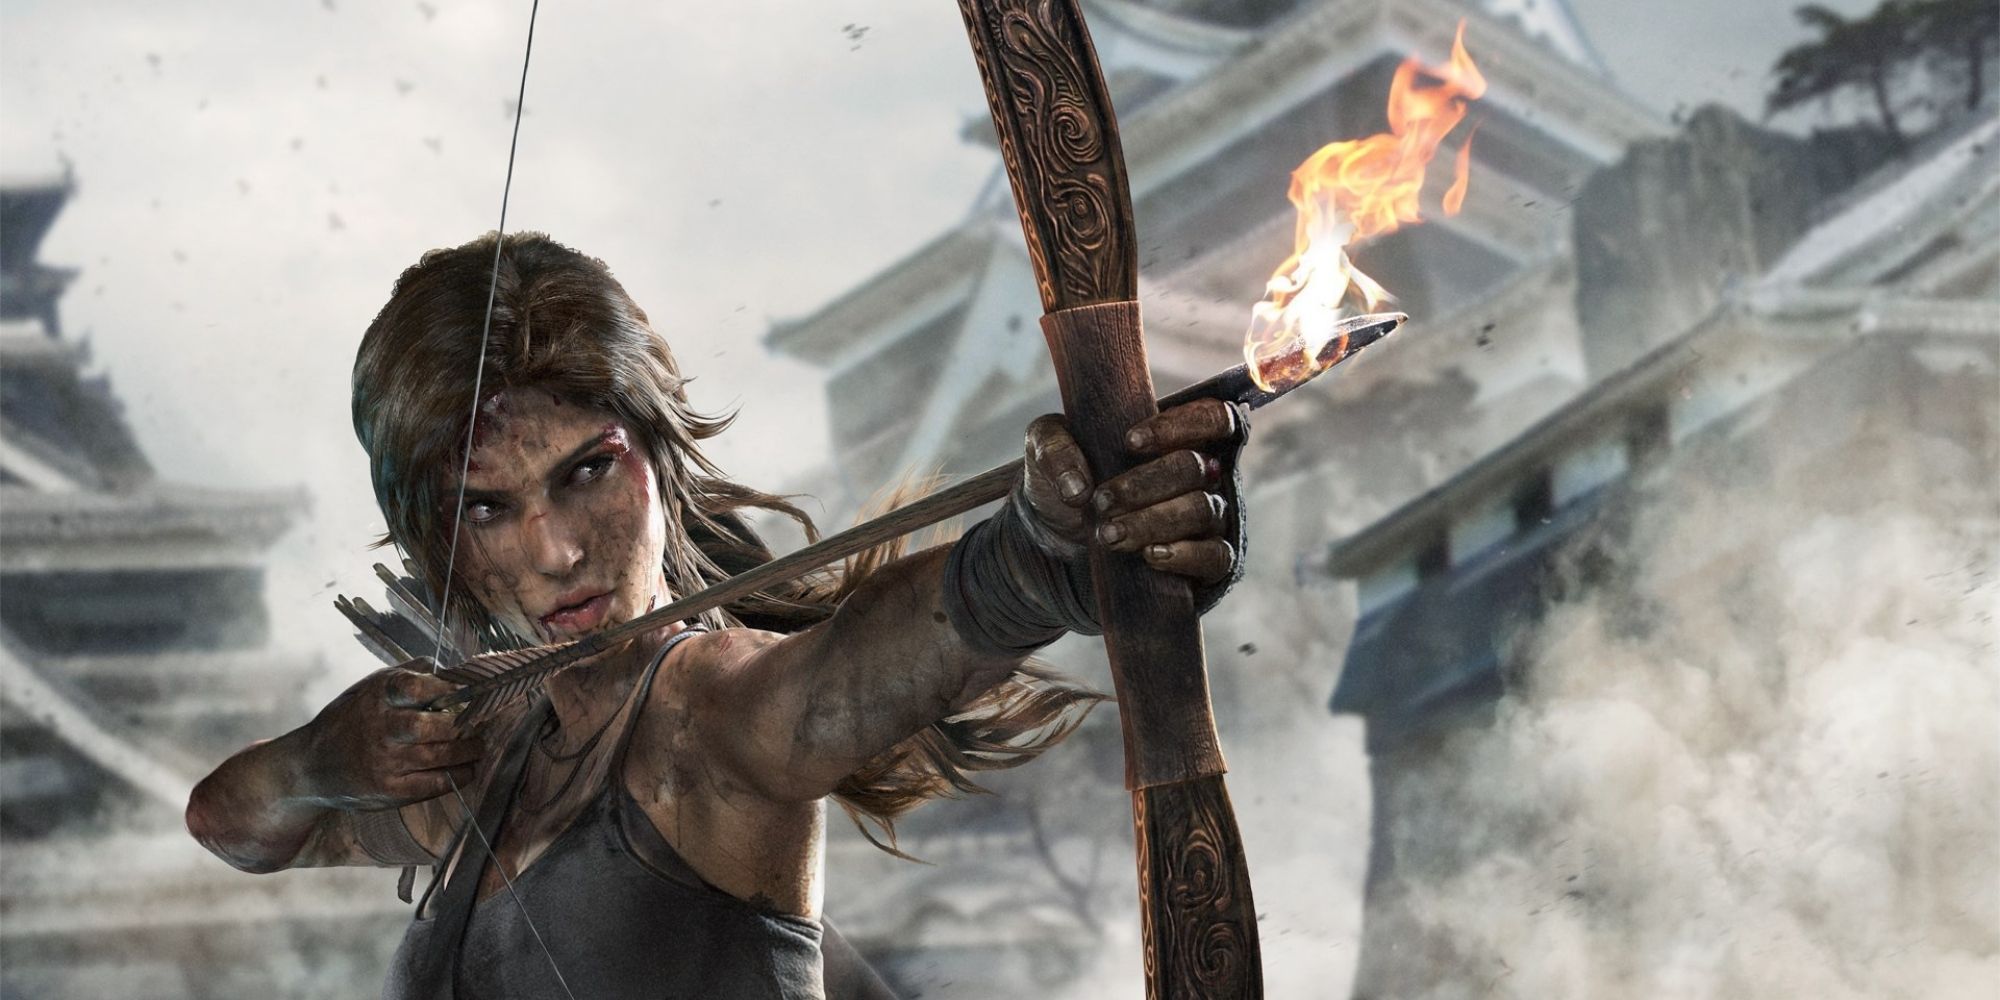 Lara Croft aiming a bow with a flaming arrow In Tomb Raider (2013)